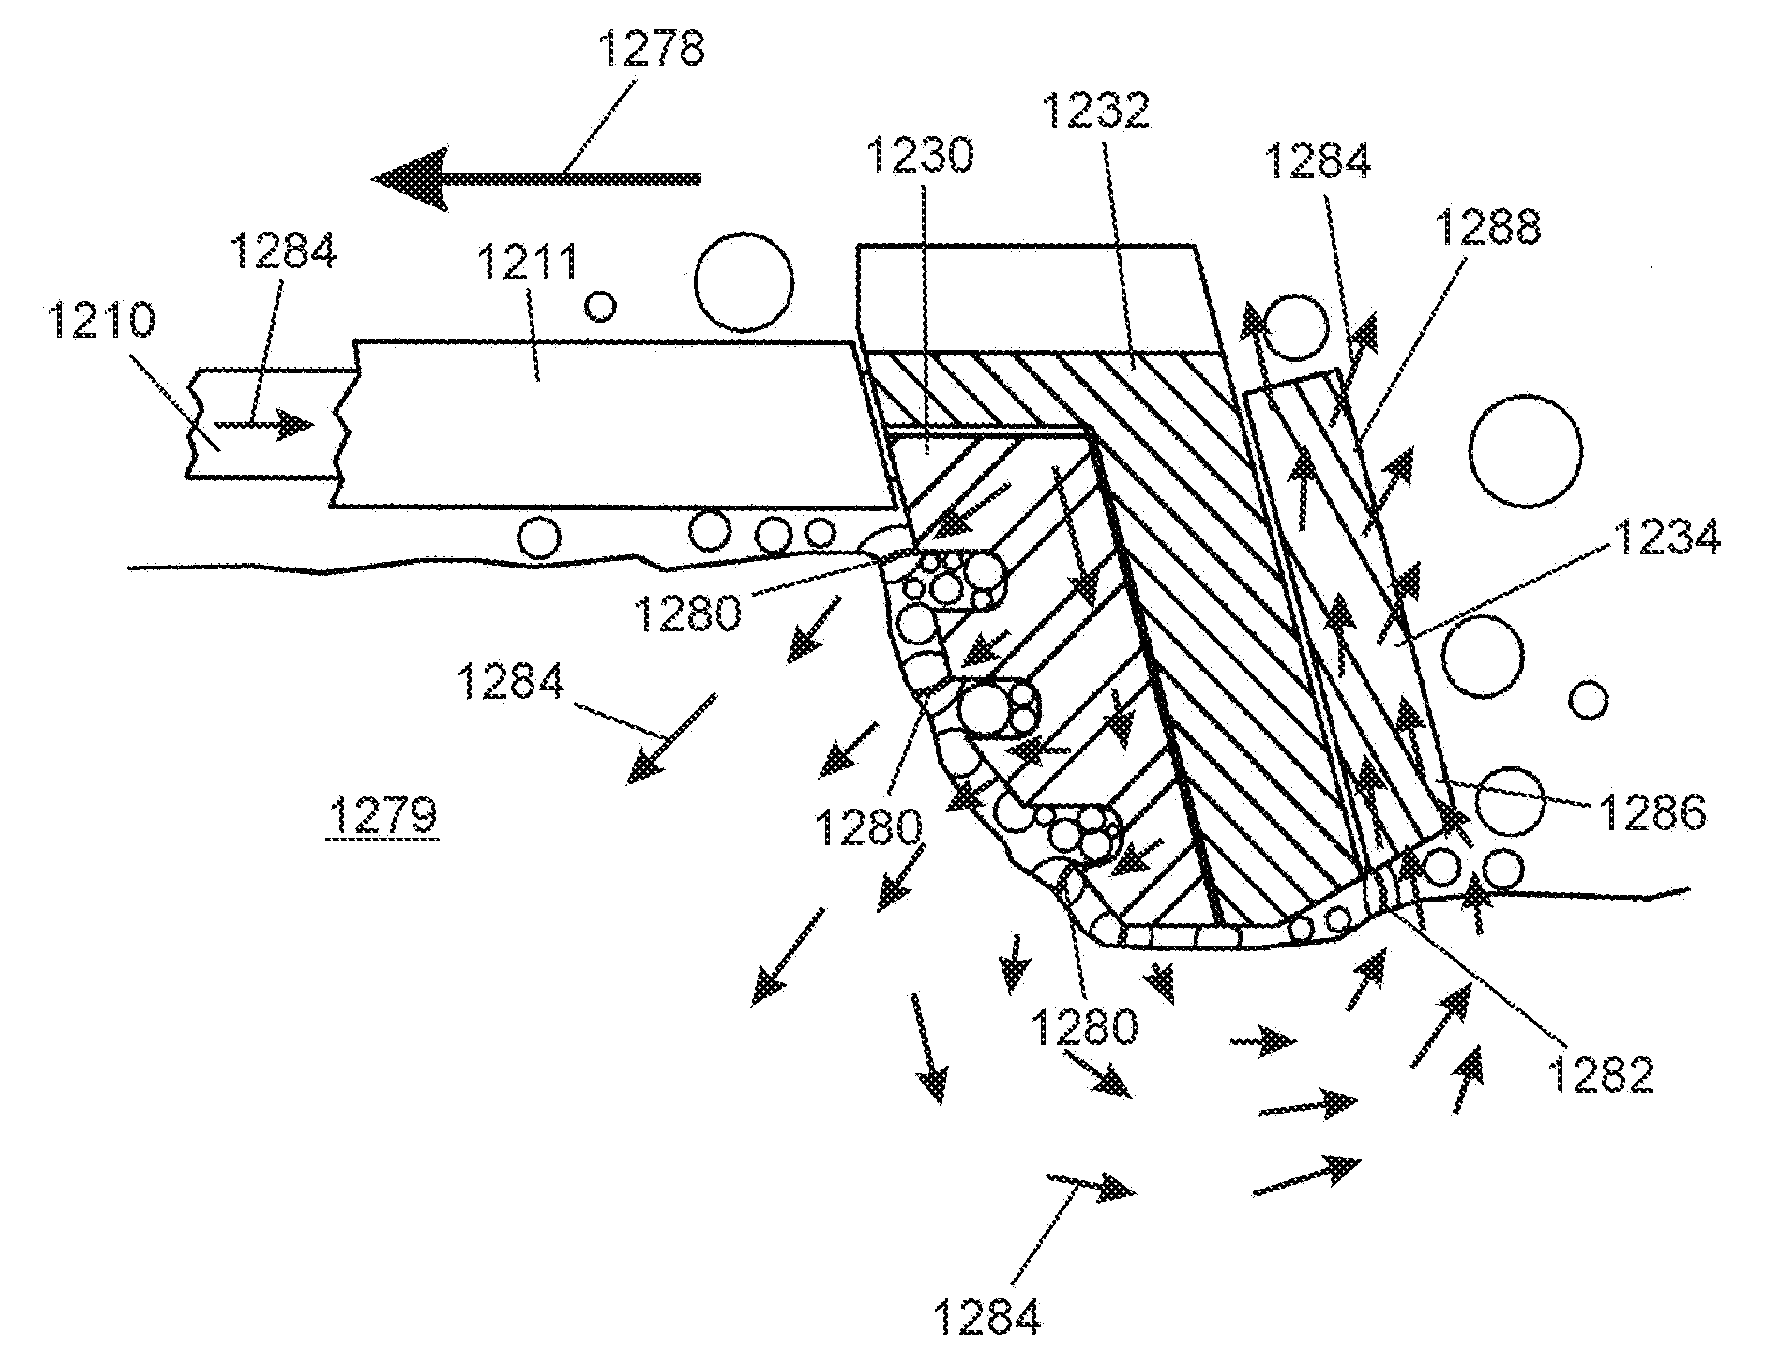 Electrosurgical device having floating potential electrode and adapted for use with a resectoscope